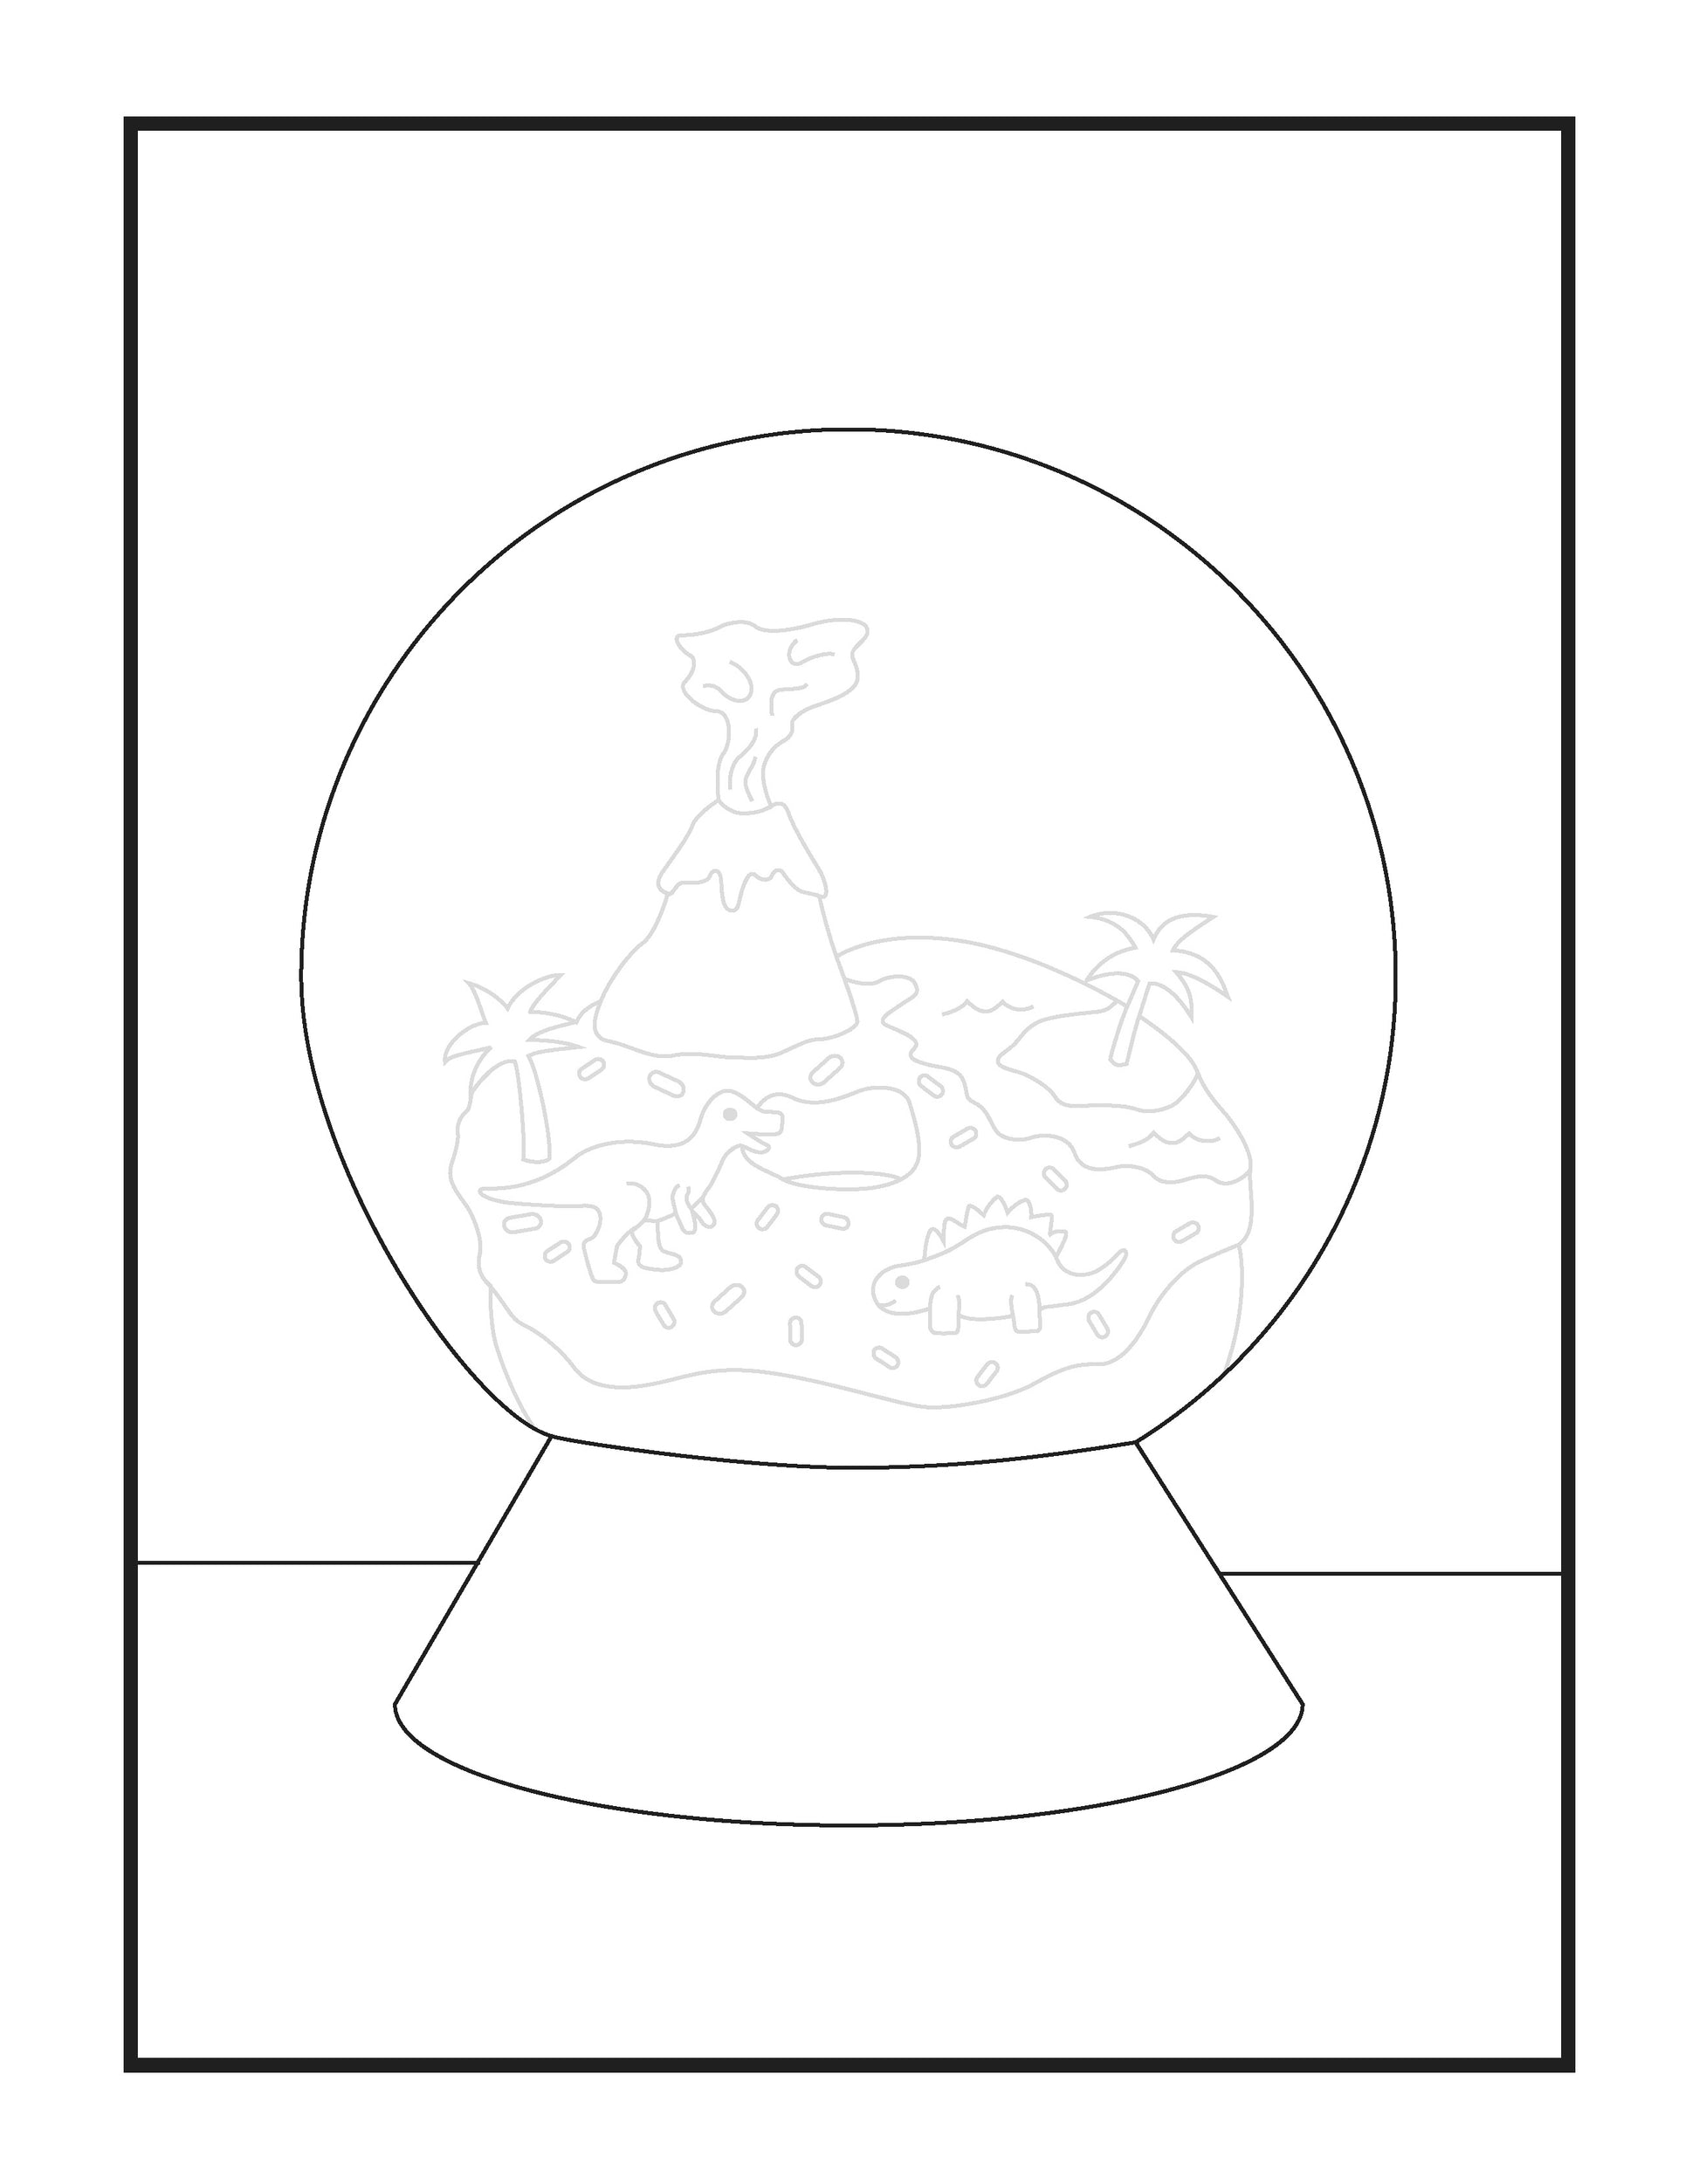 A black and white coloring page depicts a snow globe with a prehistoric landscape. Inside the globe, a volcano erupts while dinosaurs roam around palm trees on rugged terrain. The scene encapsulates a dynamic moment from the Mesozoic era, frozen in time within the confines of the globe. The base of the snow globe is broad and plain, awaiting the addition of colors. This imaginative drawing is designed to both educate and entertain young dinosaur enthusiasts.